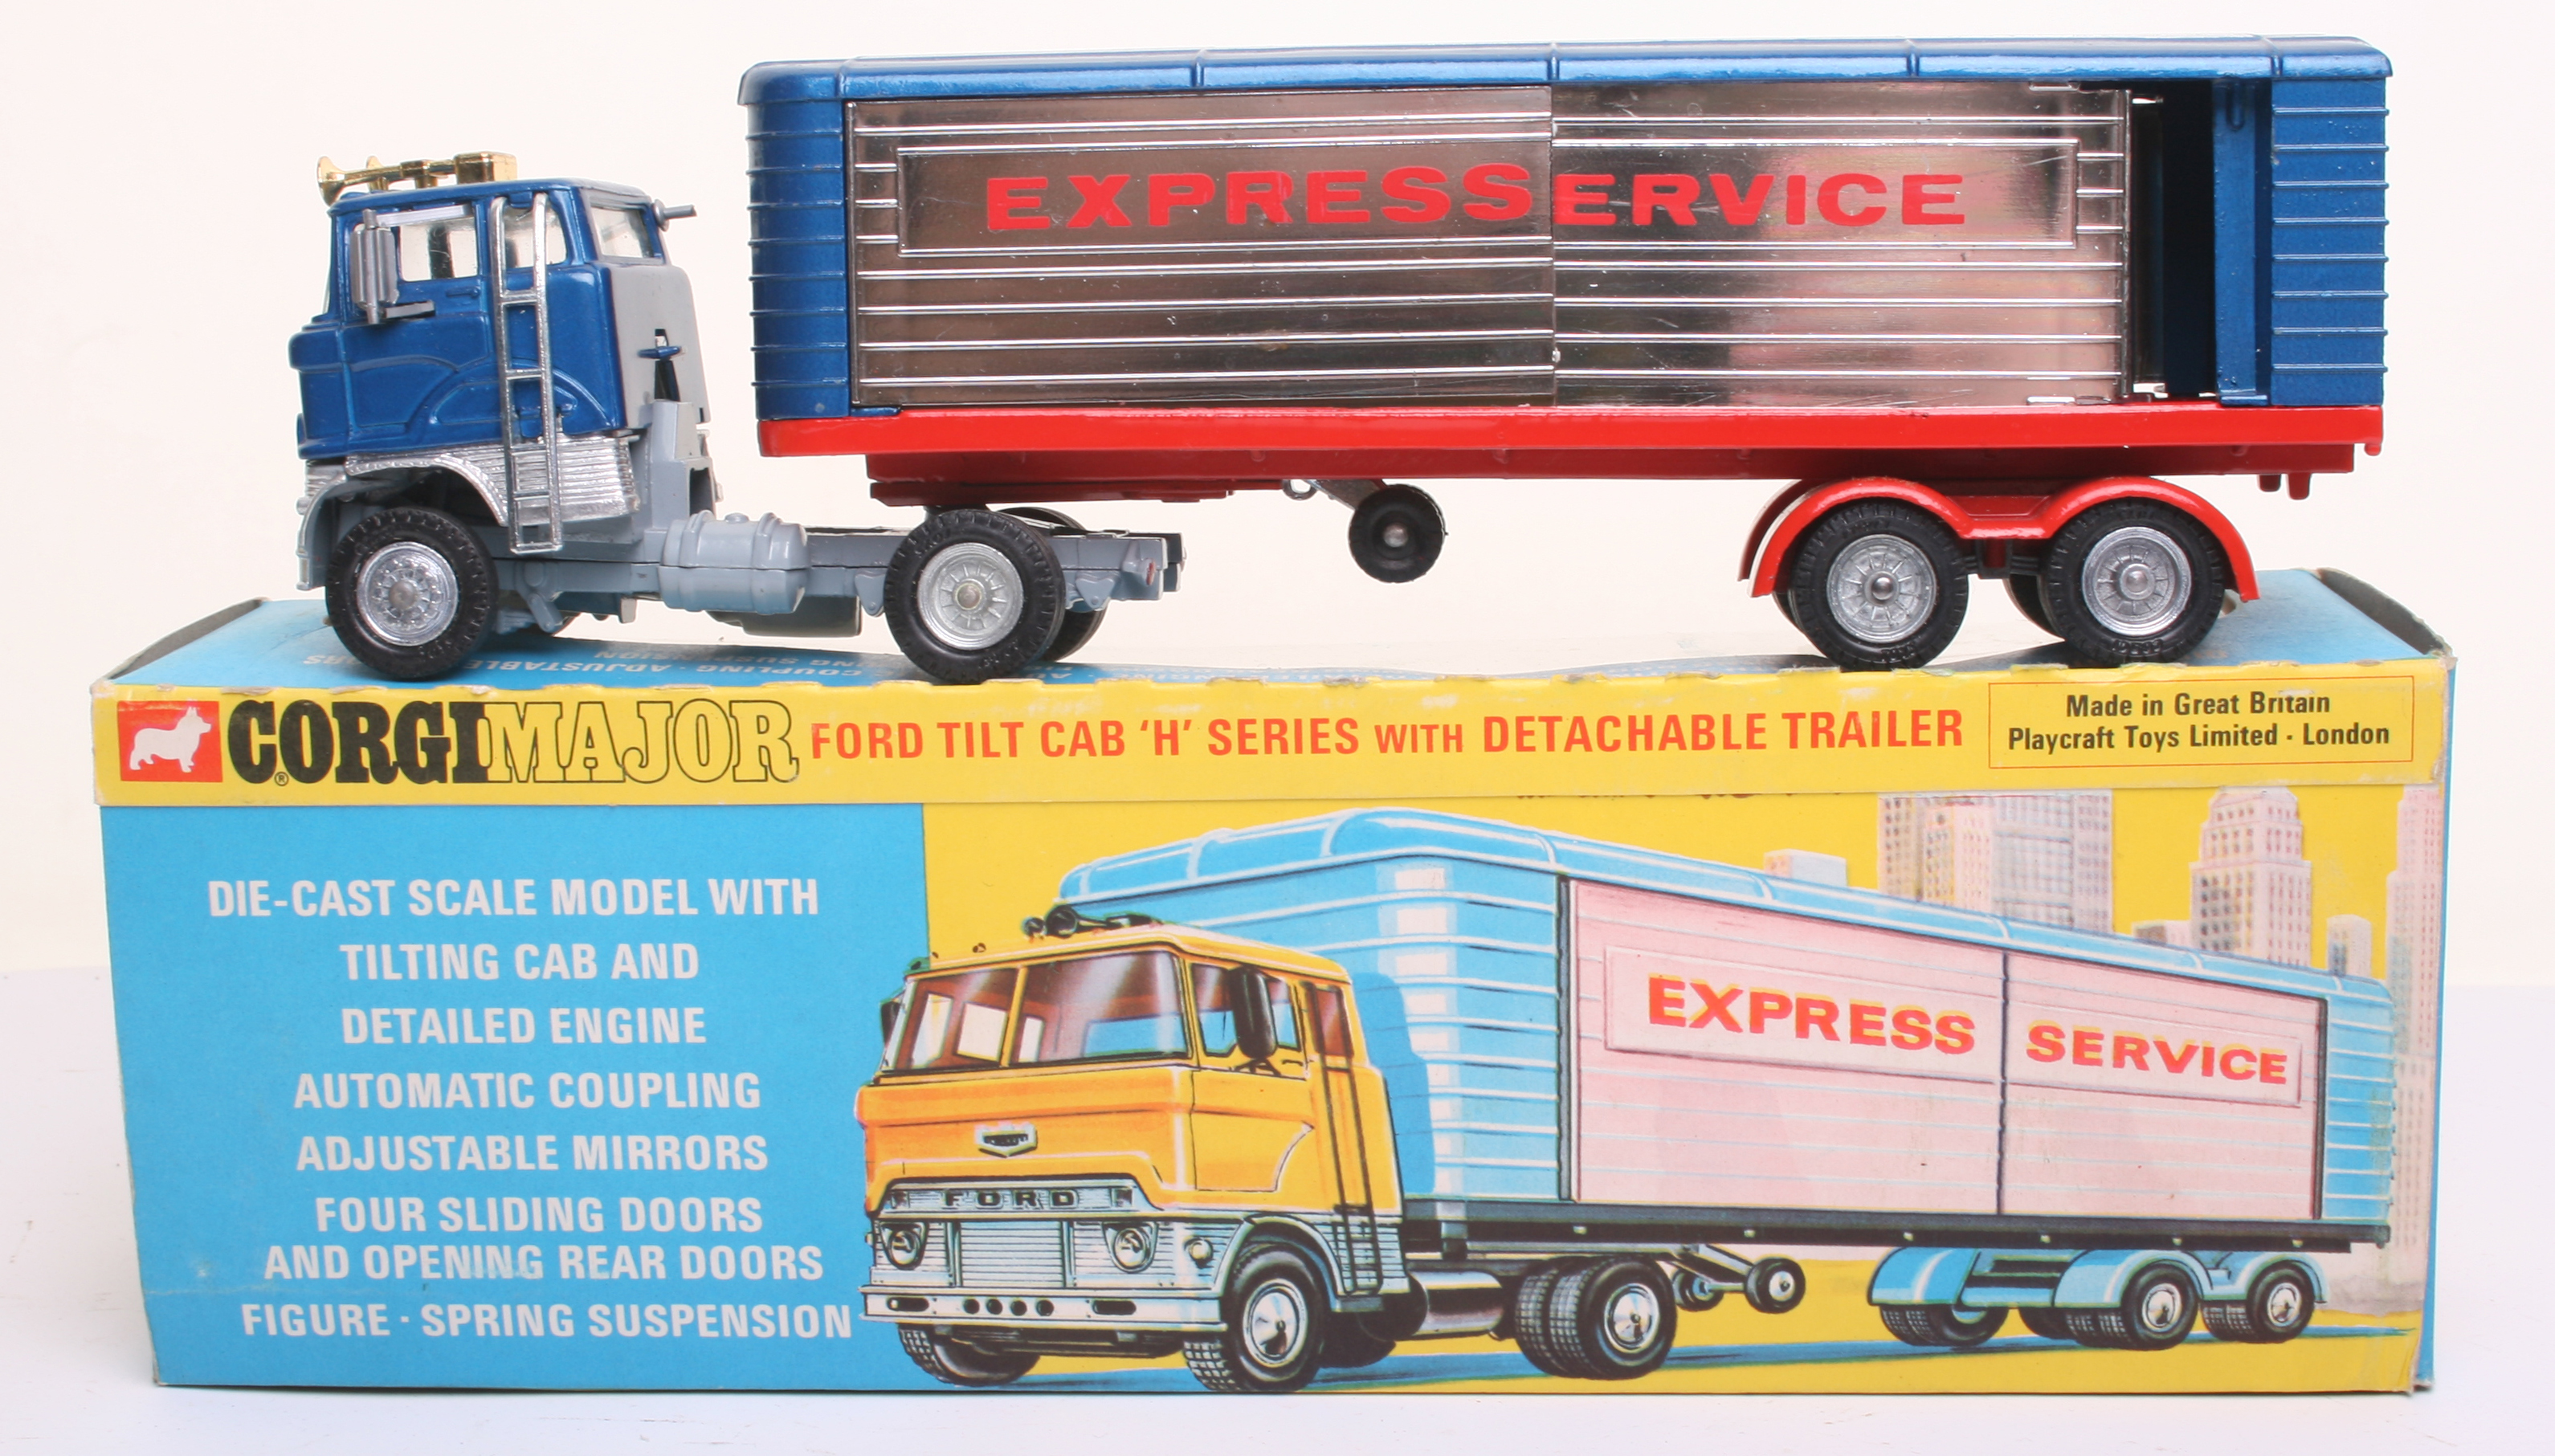 Corgi Major Toys 1137 Ford Articulated Truck “ Express Service” metallic blue/red/silver body, - Image 2 of 3